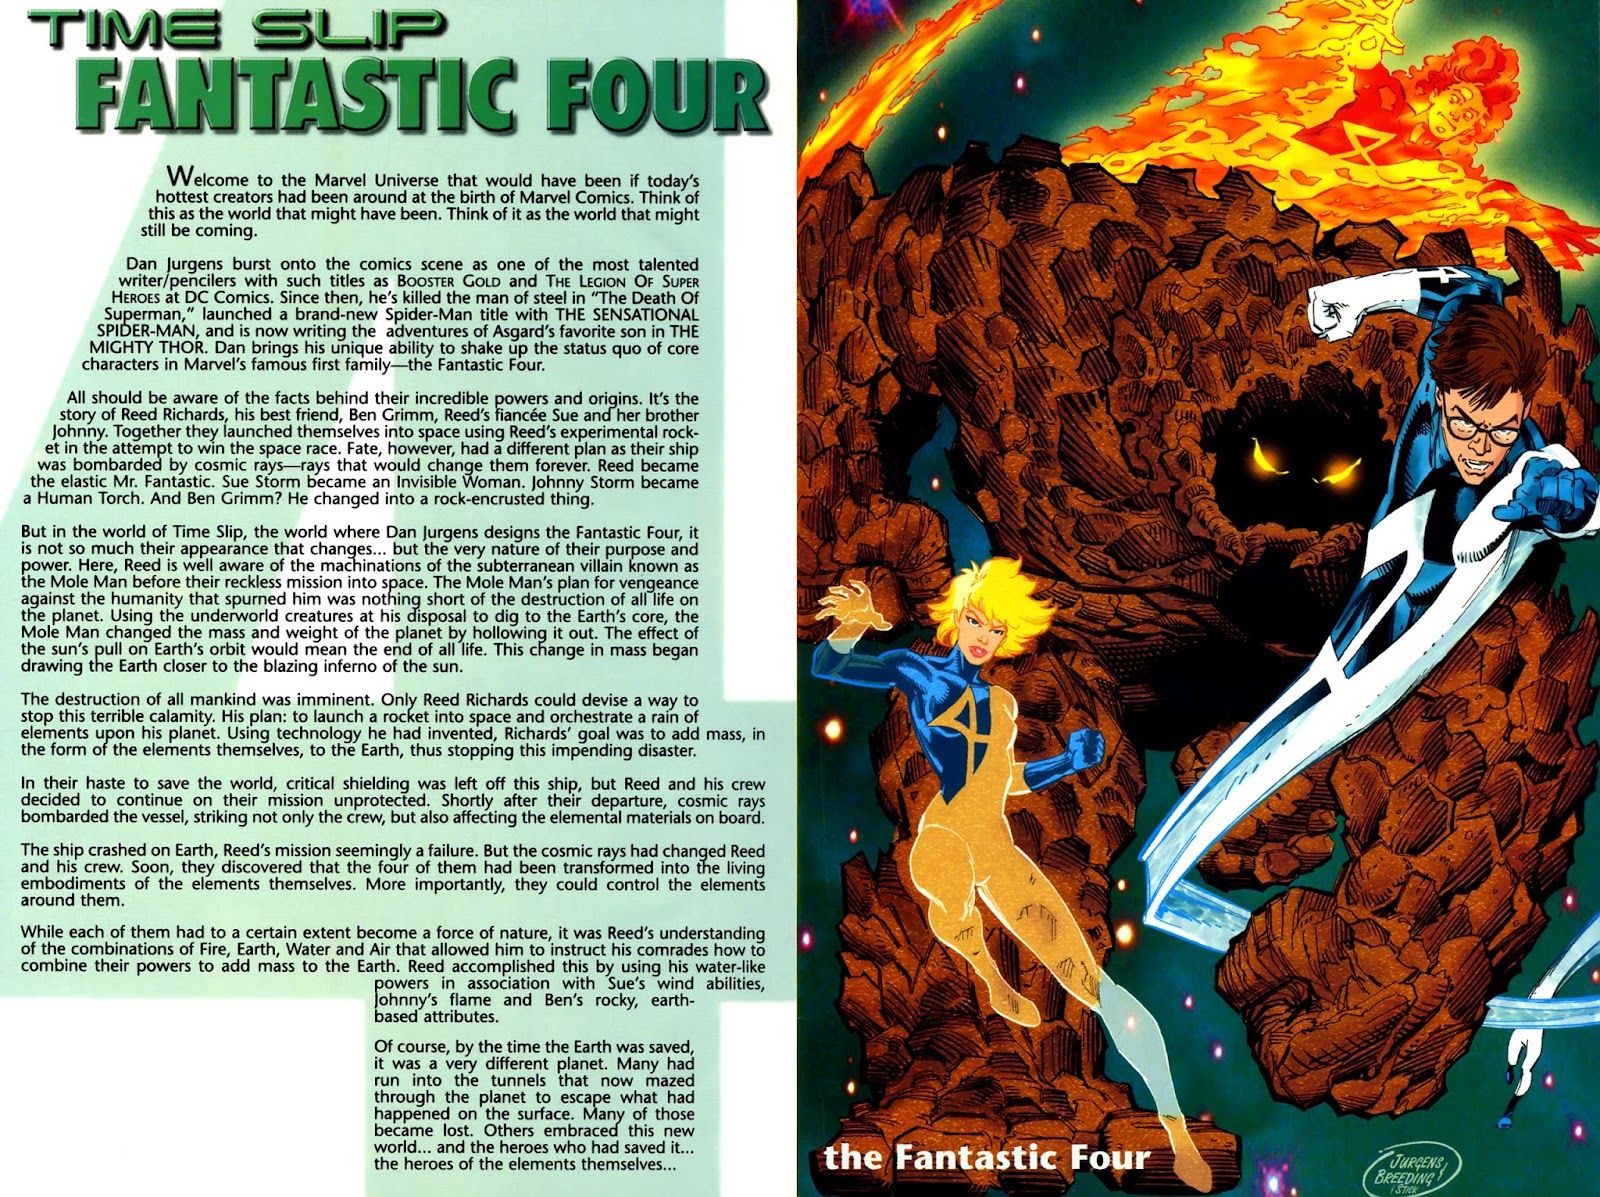 Fantastic Four’s Most Extreme Redesign Solves the Mystery of Their Powers